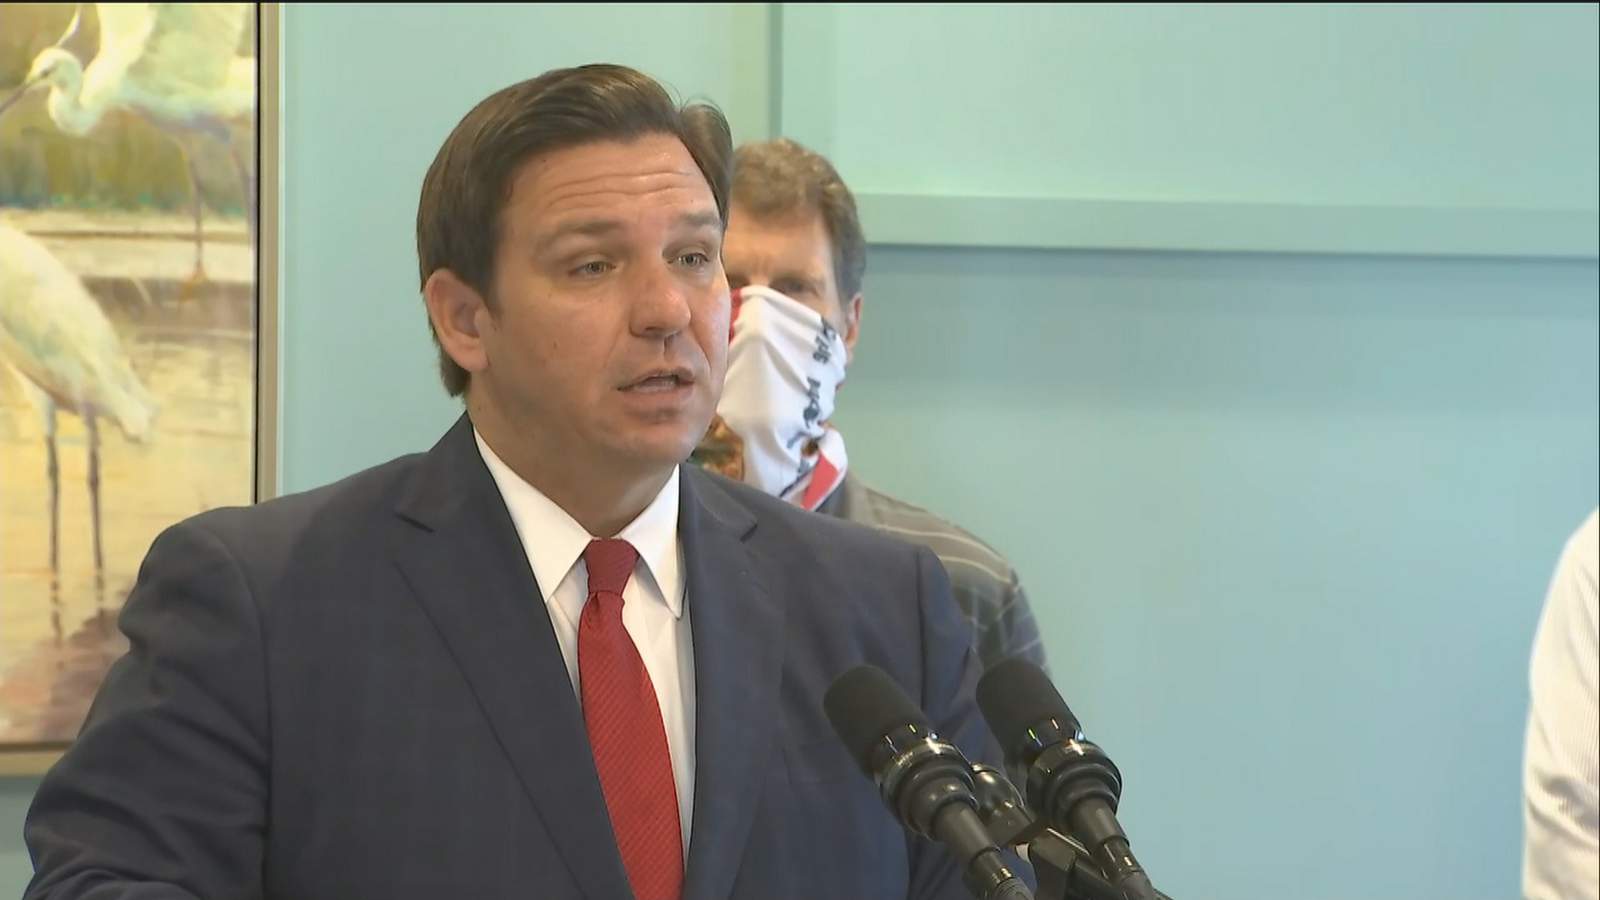 WATCH: Gov. Ron DeSantis holds news conference at The Villages